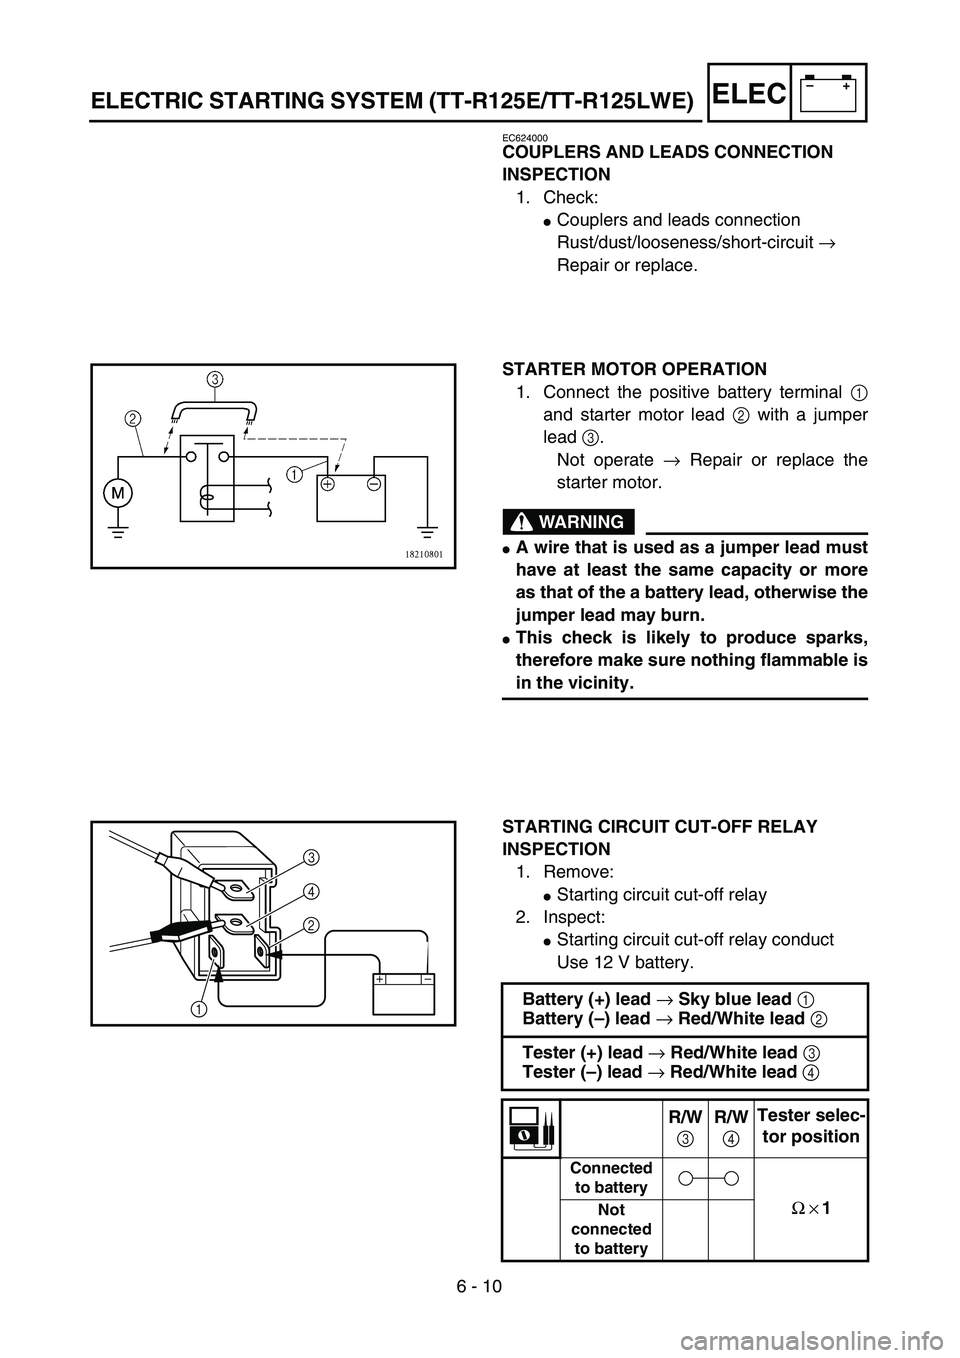 YAMAHA TTR125 2006  Owners Manual 6 - 10
–+ELEC
EC624000
COUPLERS AND LEADS CONNECTION 
INSPECTION
1. Check:
Couplers and leads connection 
Rust/dust/looseness/short-circuit → 
Repair or replace.
STARTER MOTOR OPERATION
1. Connec